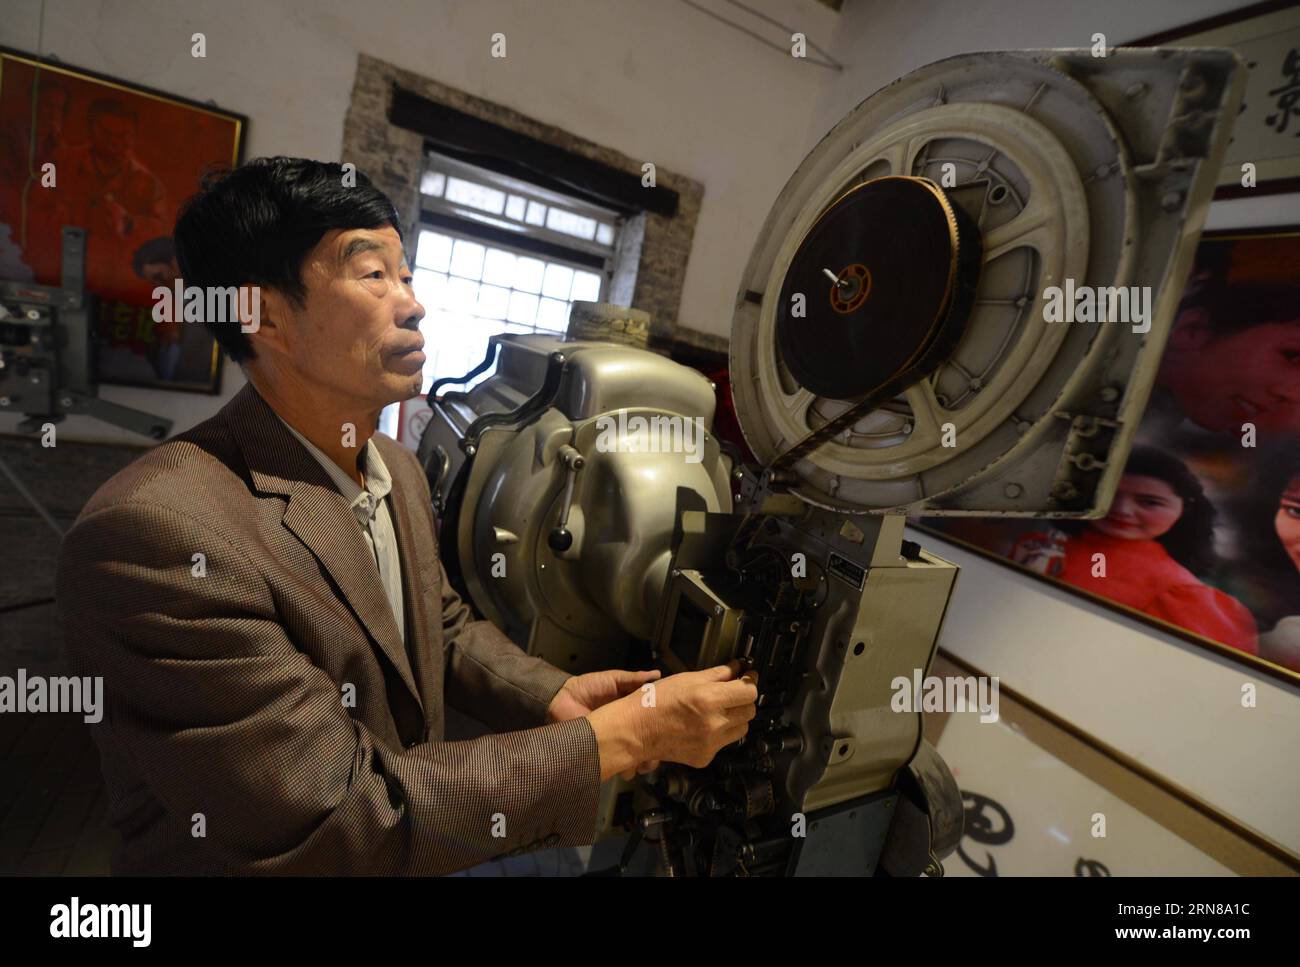 SHIJIAZHUANG, Oct. 13, 2015 -- Wei Shaoxian debugs an old film projector at his film museum in Siliugu Village of Handan County, north China s Hebei Province, Oct. 13, 2015. Cinephile Wei Shaoxian collected more than 20,000 items about film, such as filmstrip, poster and record, since 2004 and founded his private film museum in his village in 2015. ) (zkr) CHINA-SHIJIAZHUANG-FILM MUSEUM(CN) WangxXiao PUBLICATIONxNOTxINxCHN   Shijiazhuang OCT 13 2015 Wei  debug to Old Film projector AT His Film Museum in  Village of Handan County North China S Hebei Province OCT 13 2015  Wei  collected More tha Stock Photo